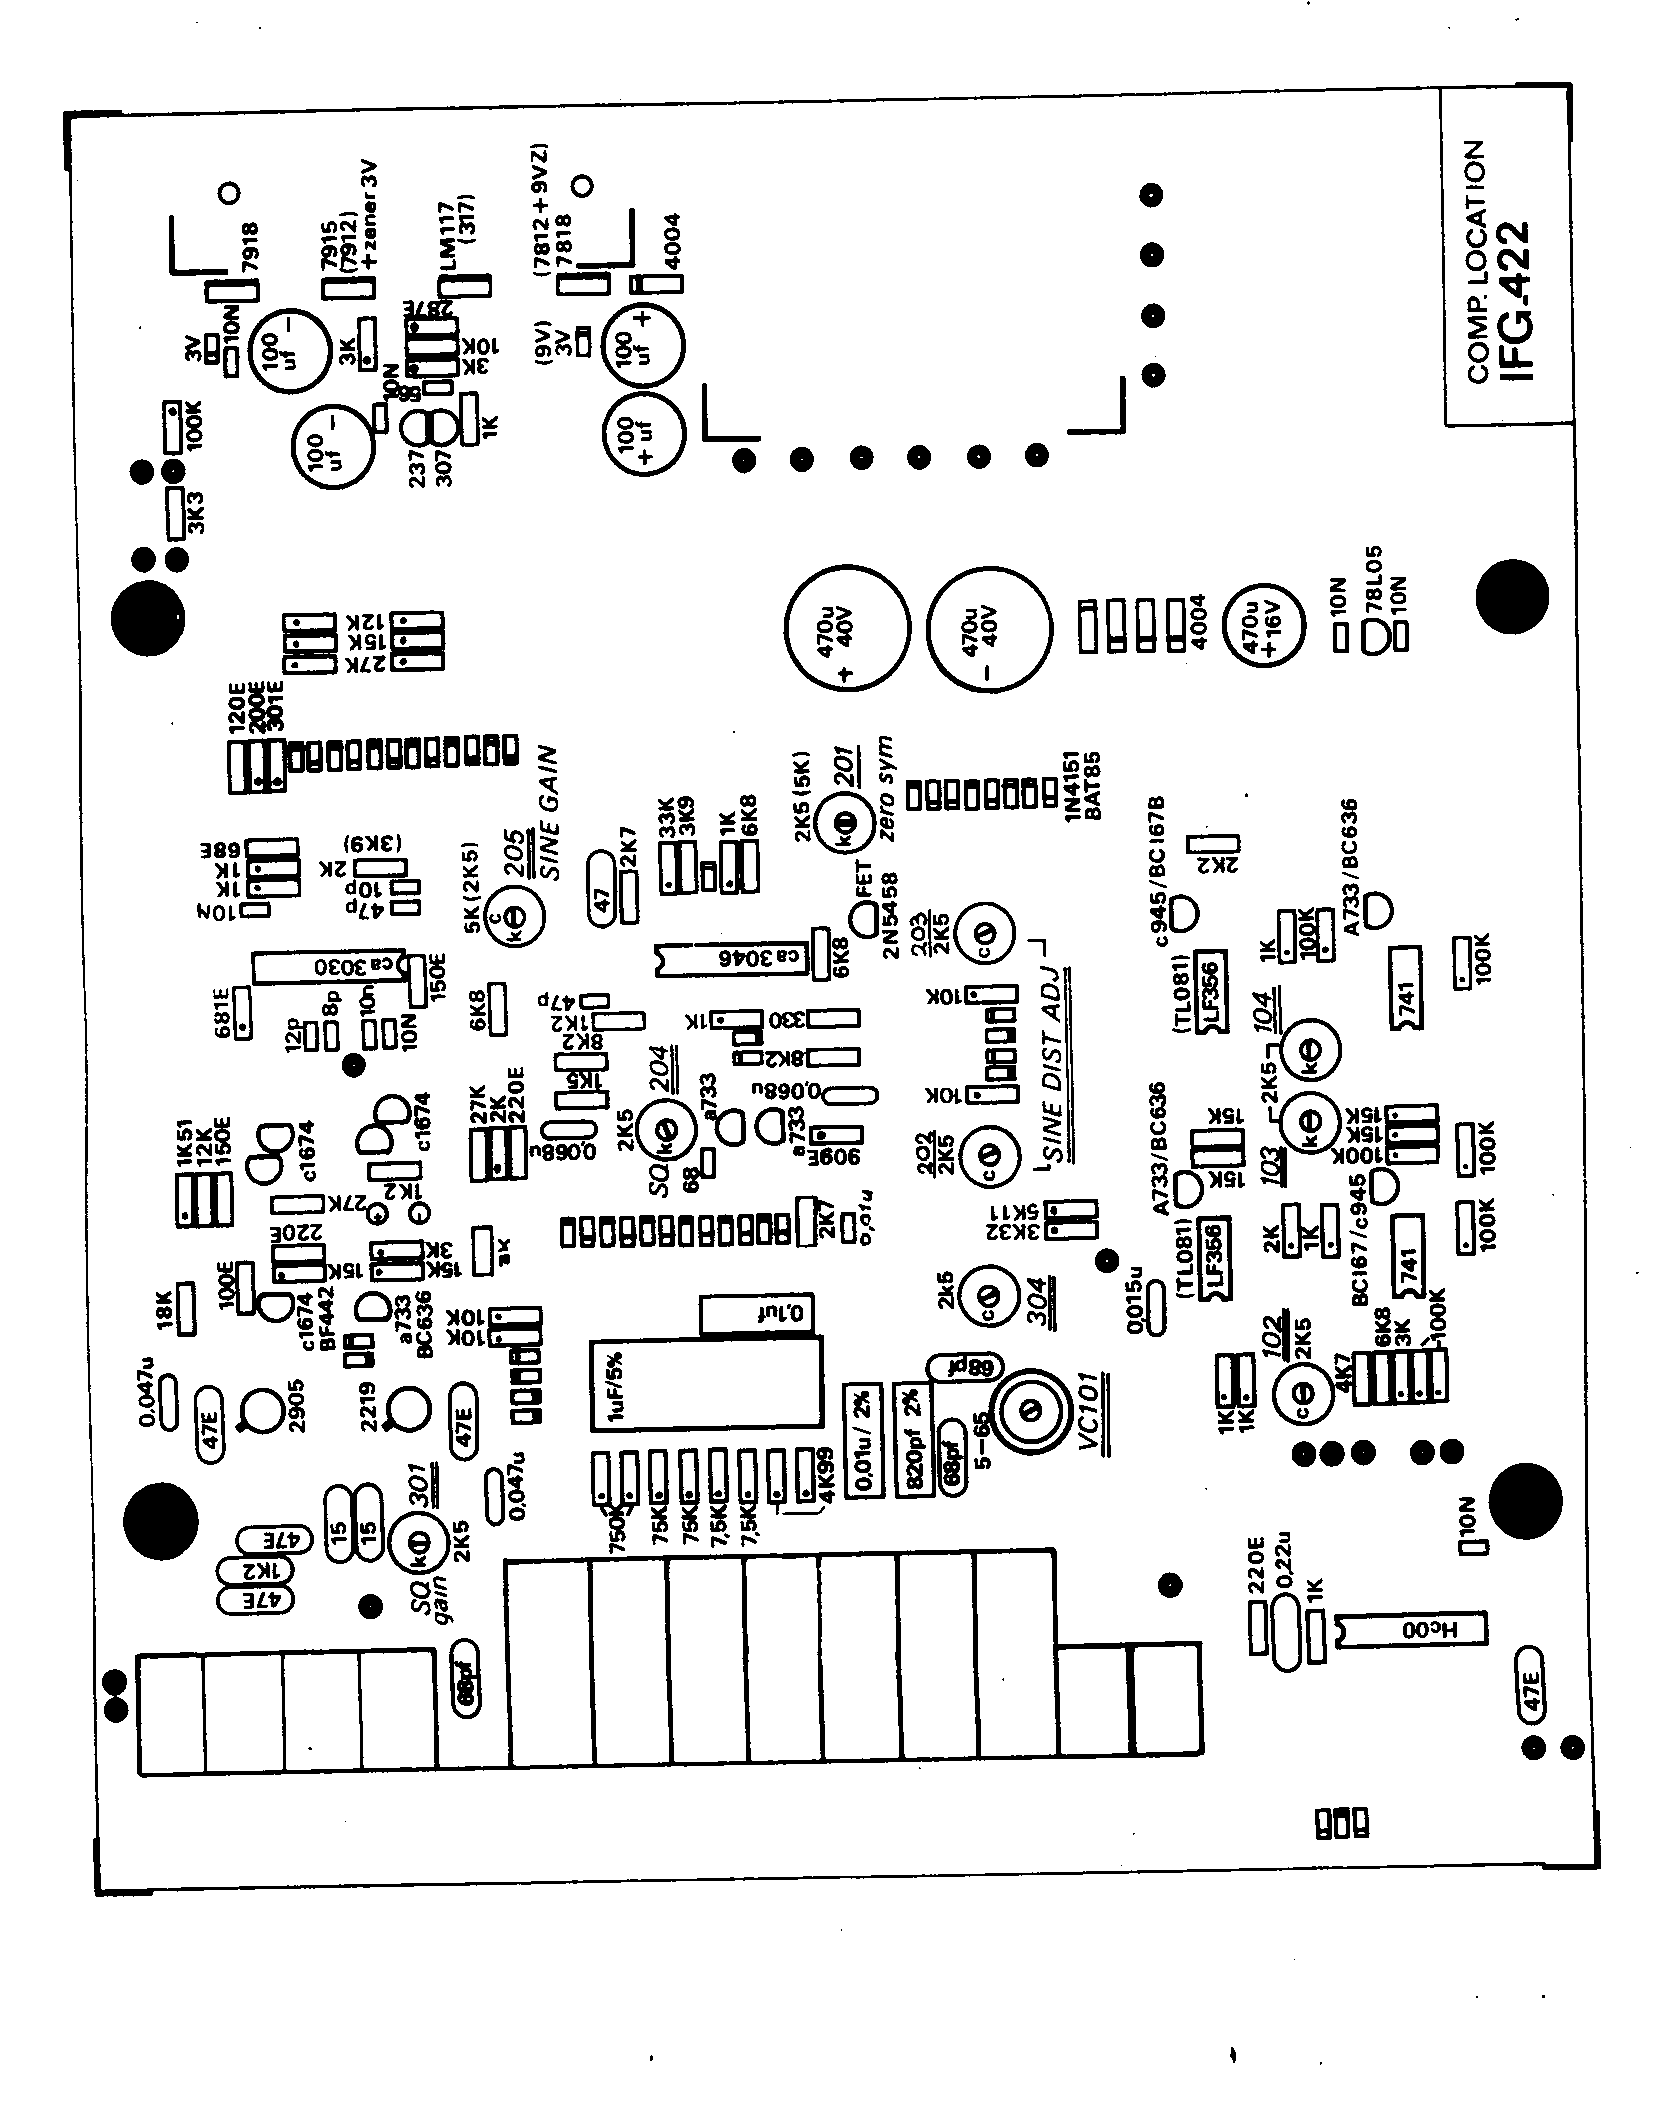 http://www.uploadarchief.net/files/download/intron%20pcb%20comp%20layout.png